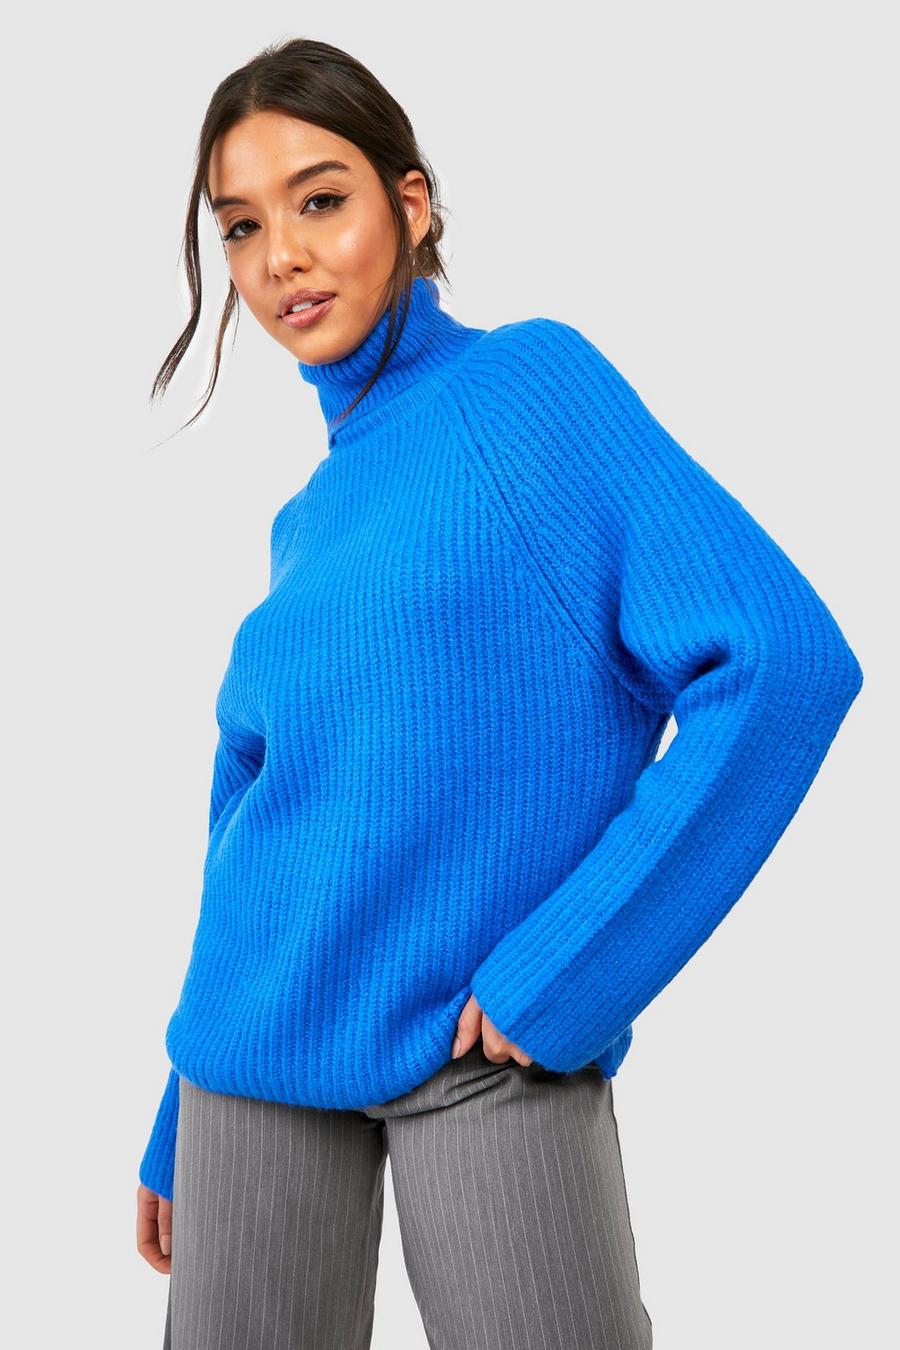 Cobalt blue Boxy Turtleneck Knitted Sweater